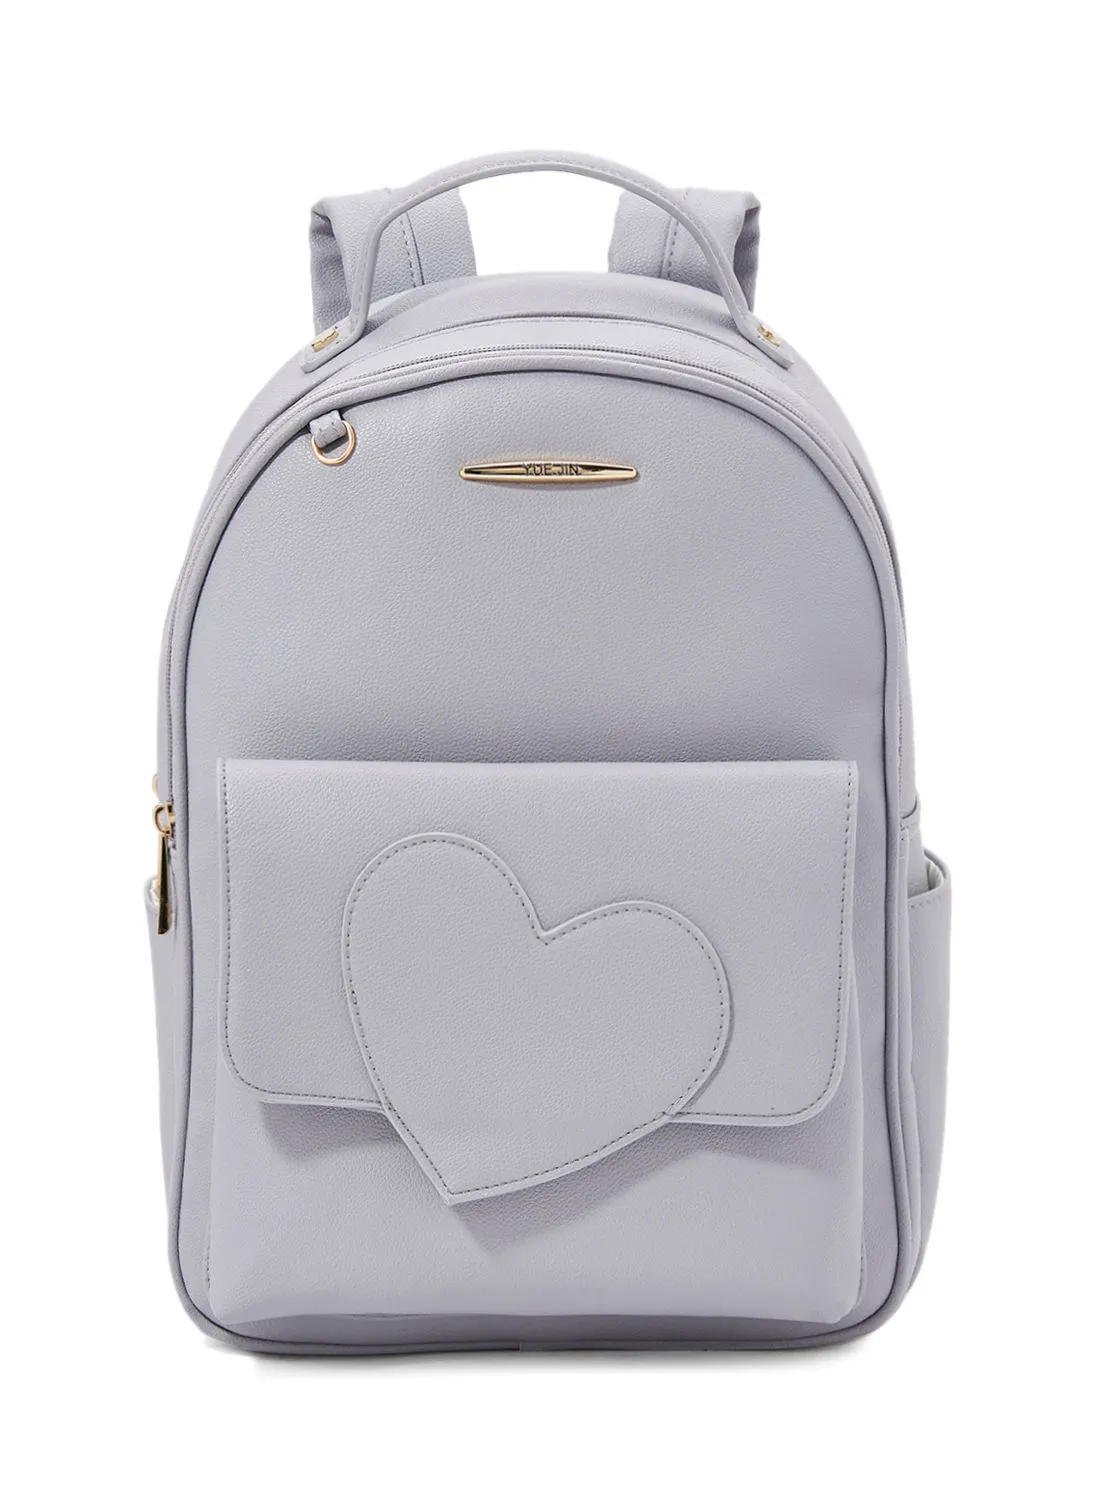 YUEJIN Faux Leather Backpack Grey